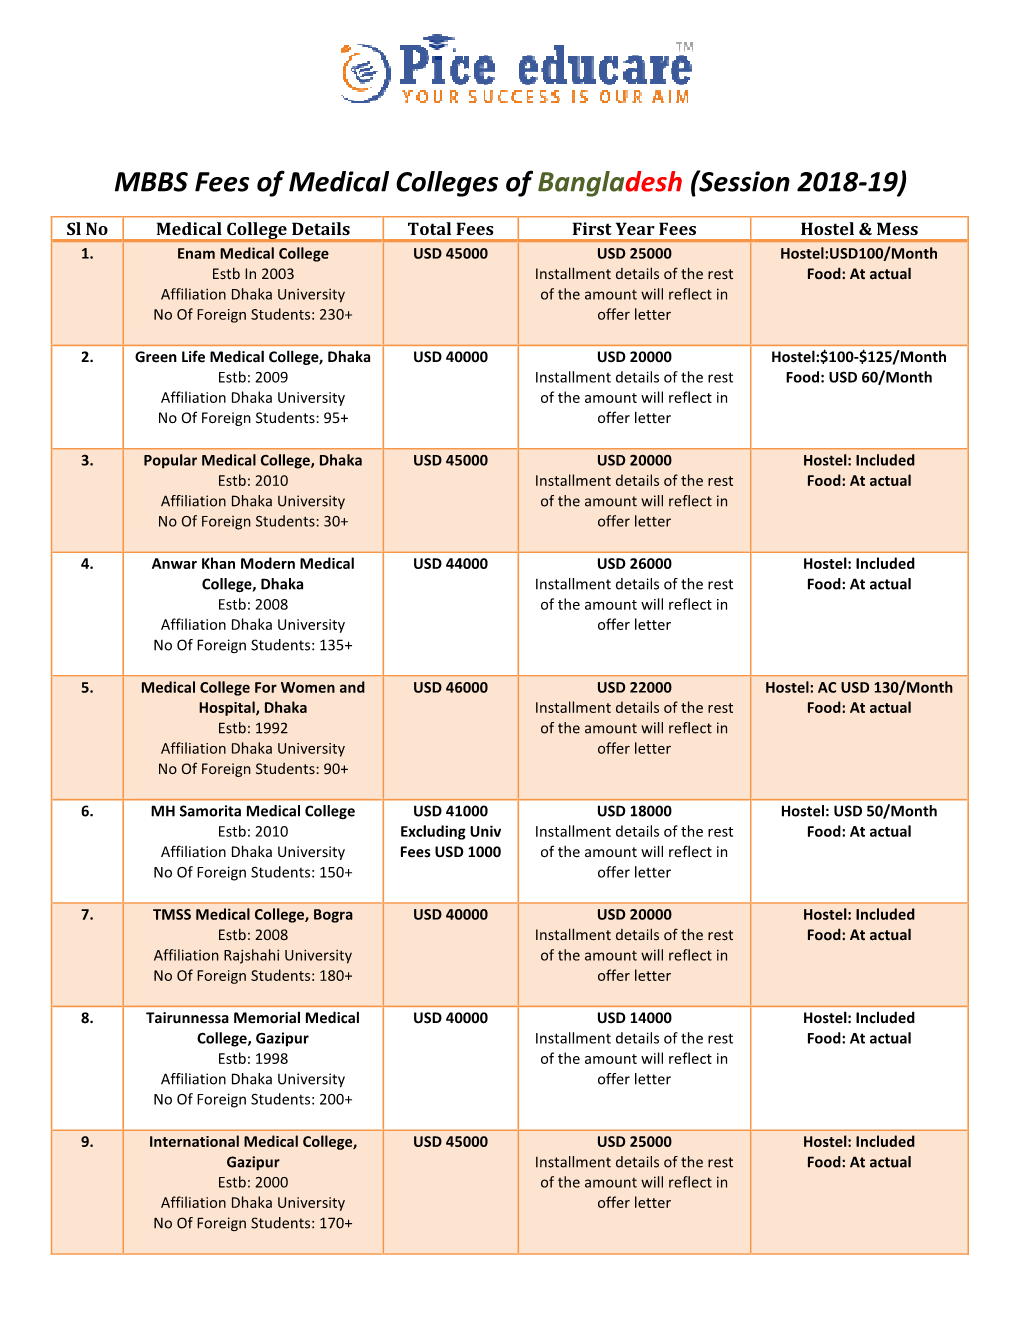 MBBS Fee Structure in Bangladesh